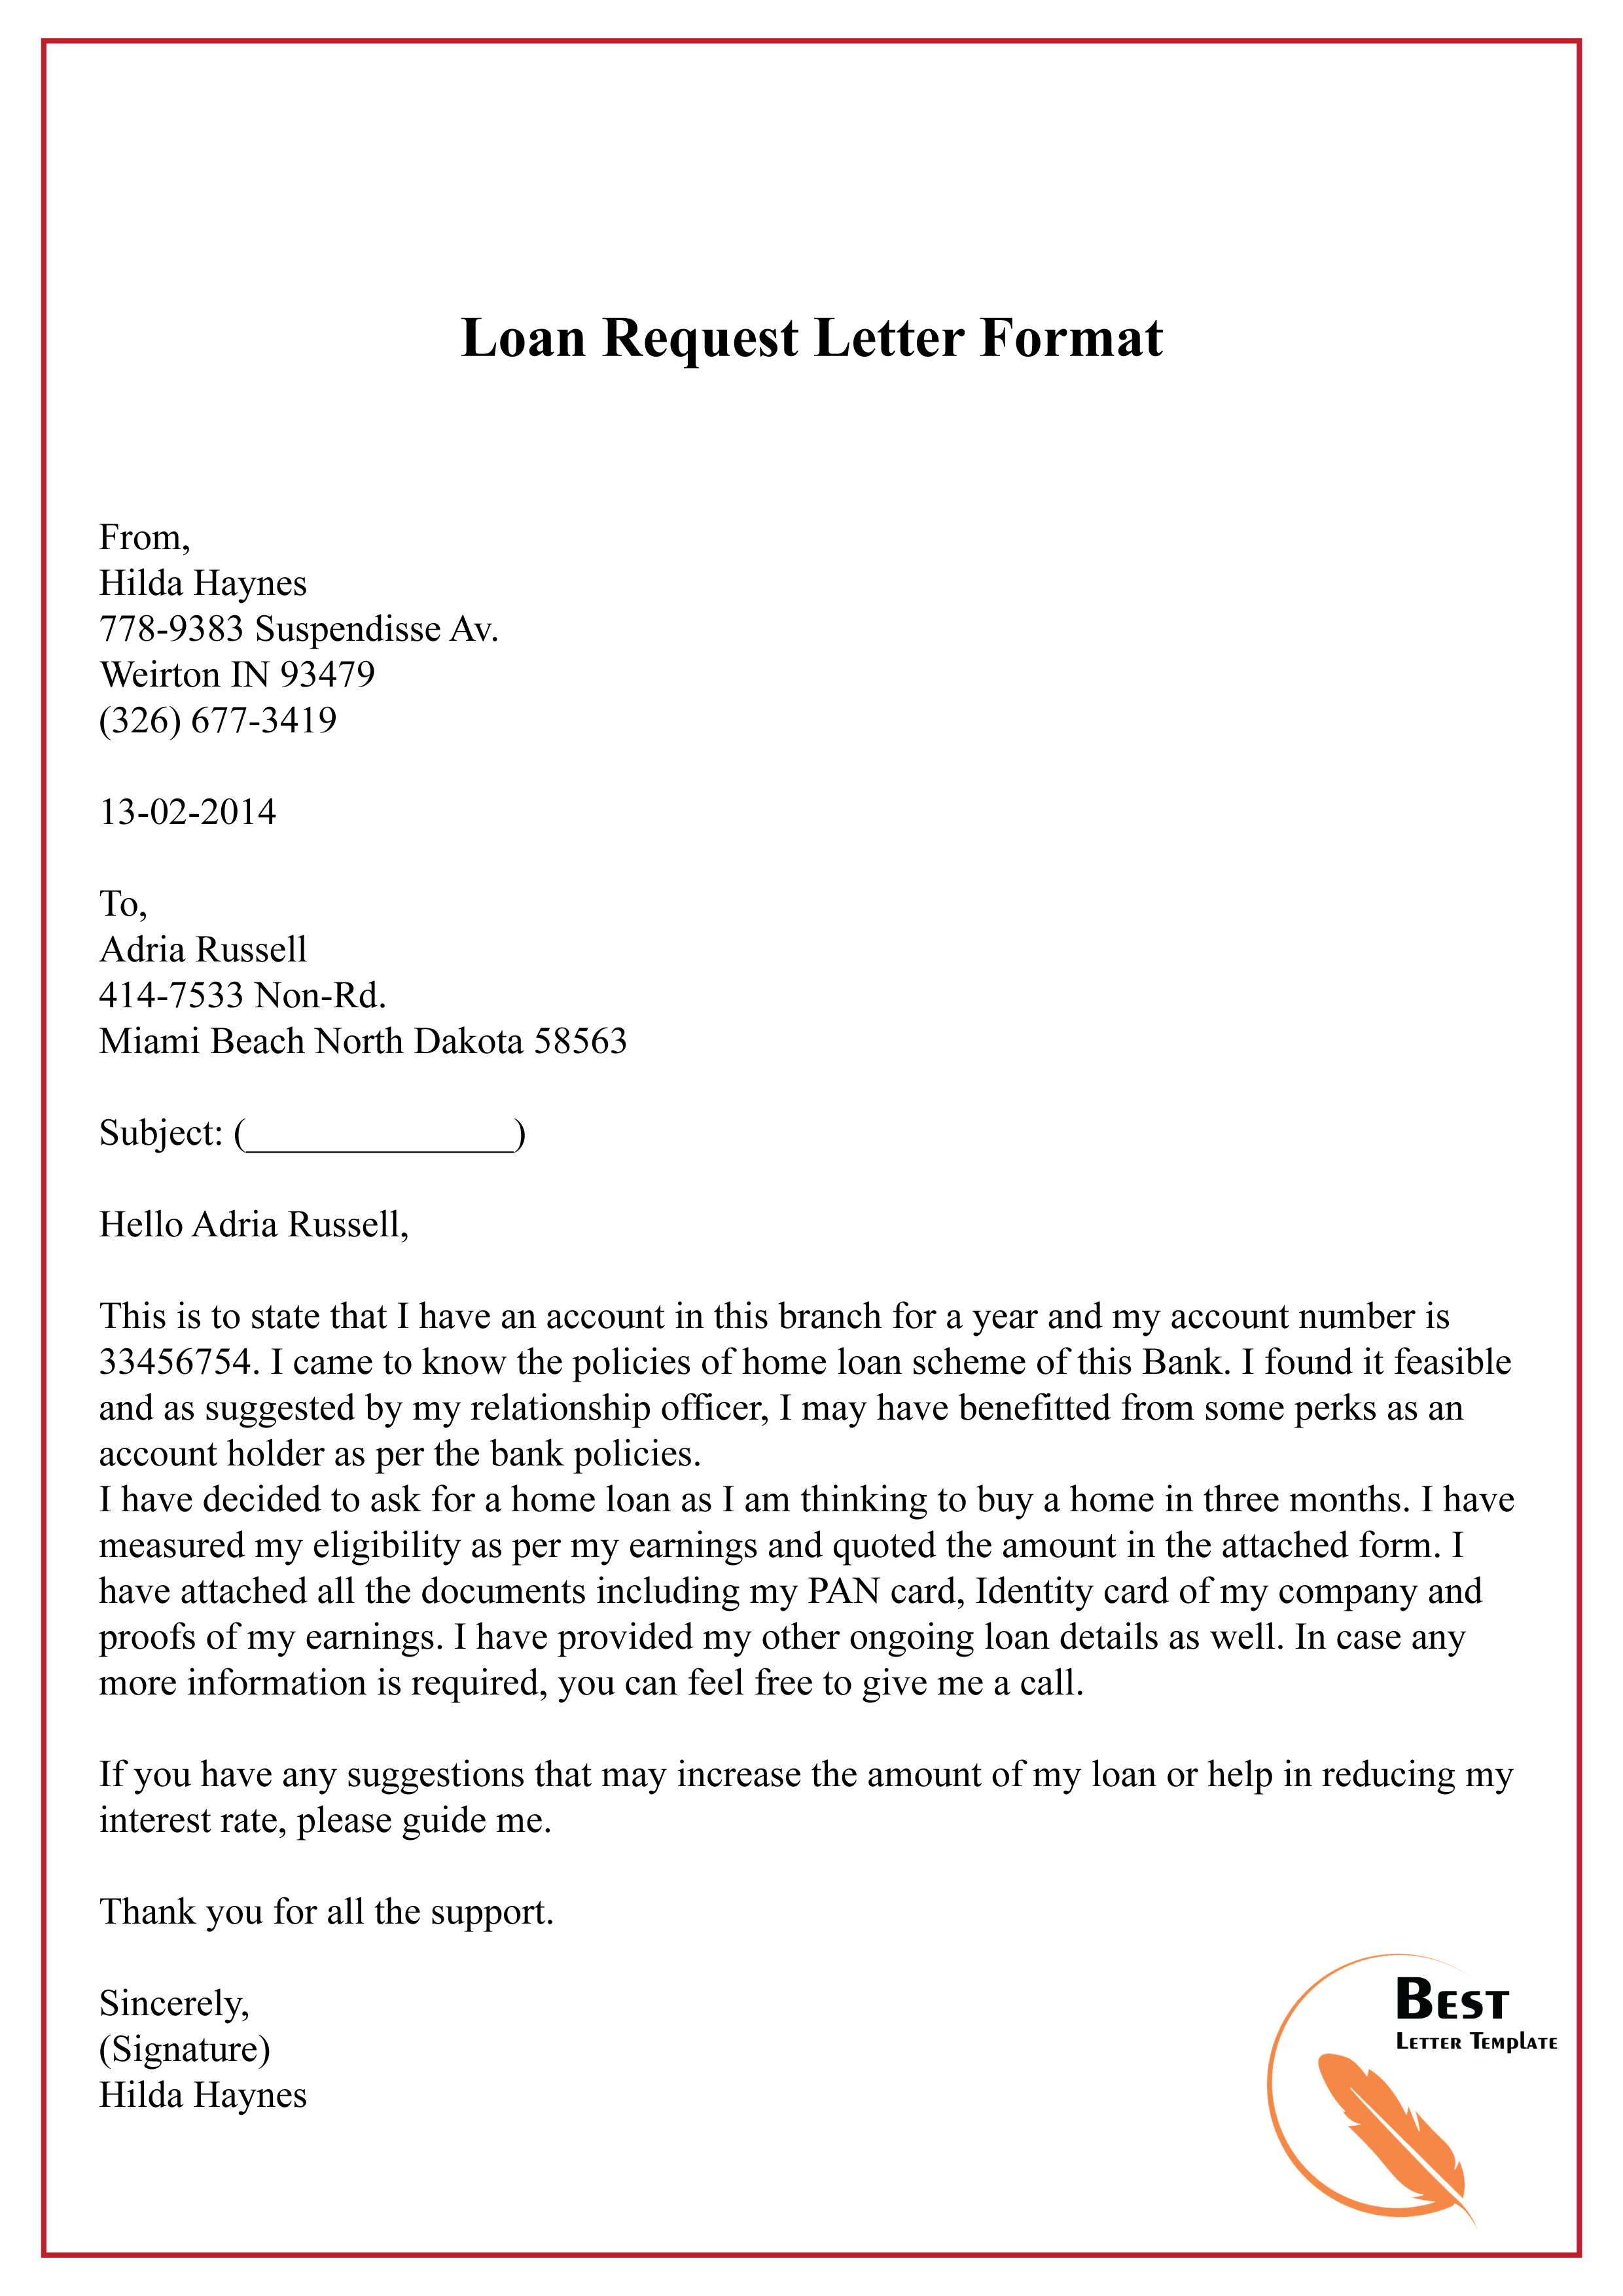 request letter for education loan repayment